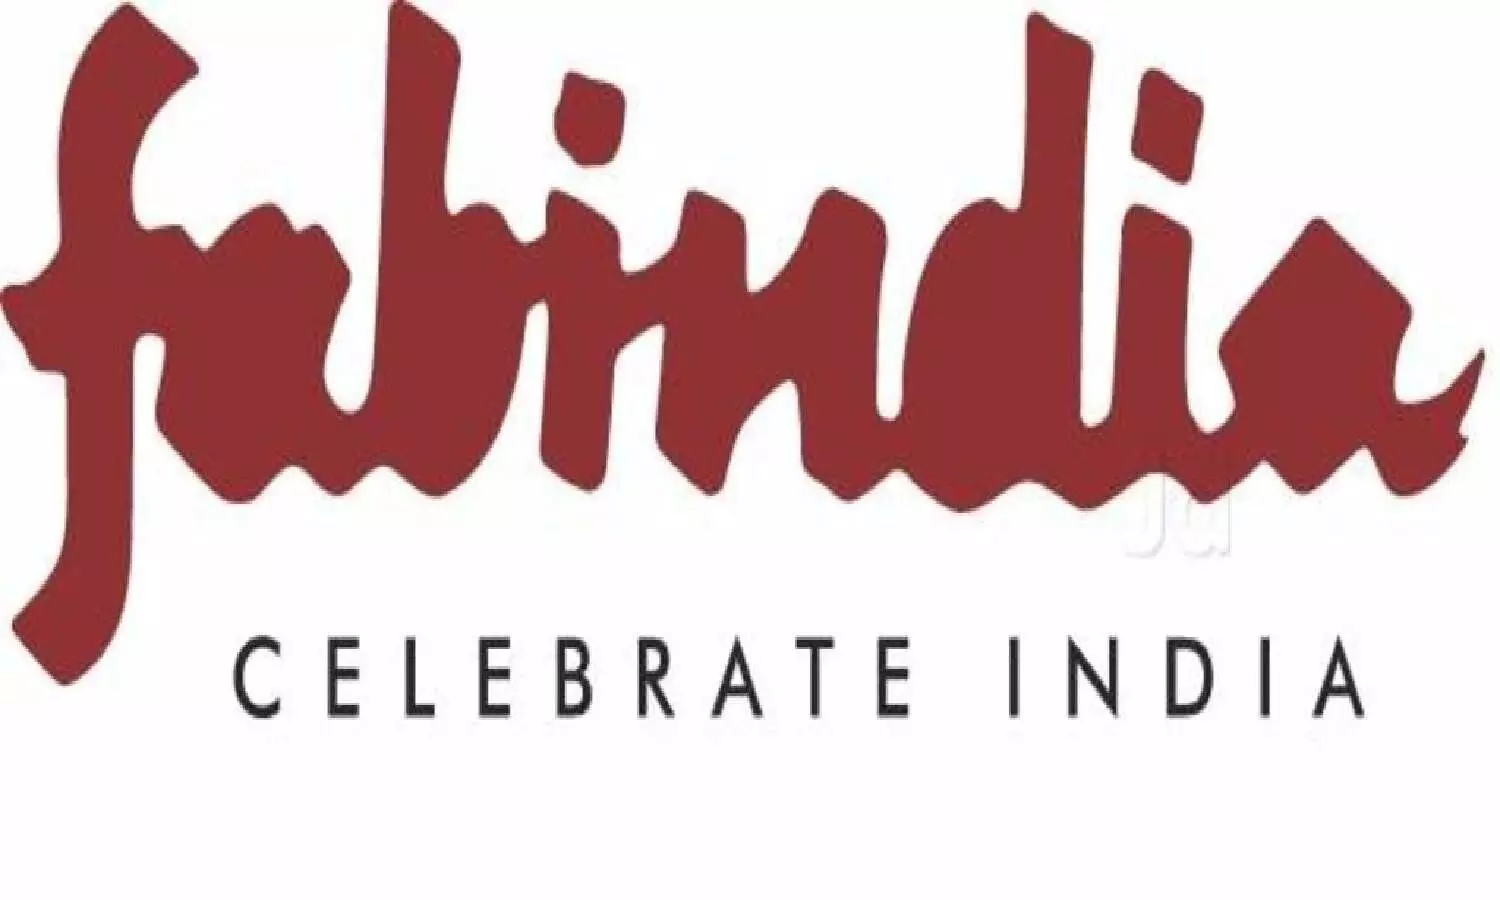 #BoycottFabIndia trends over name for Diwali ad campaign